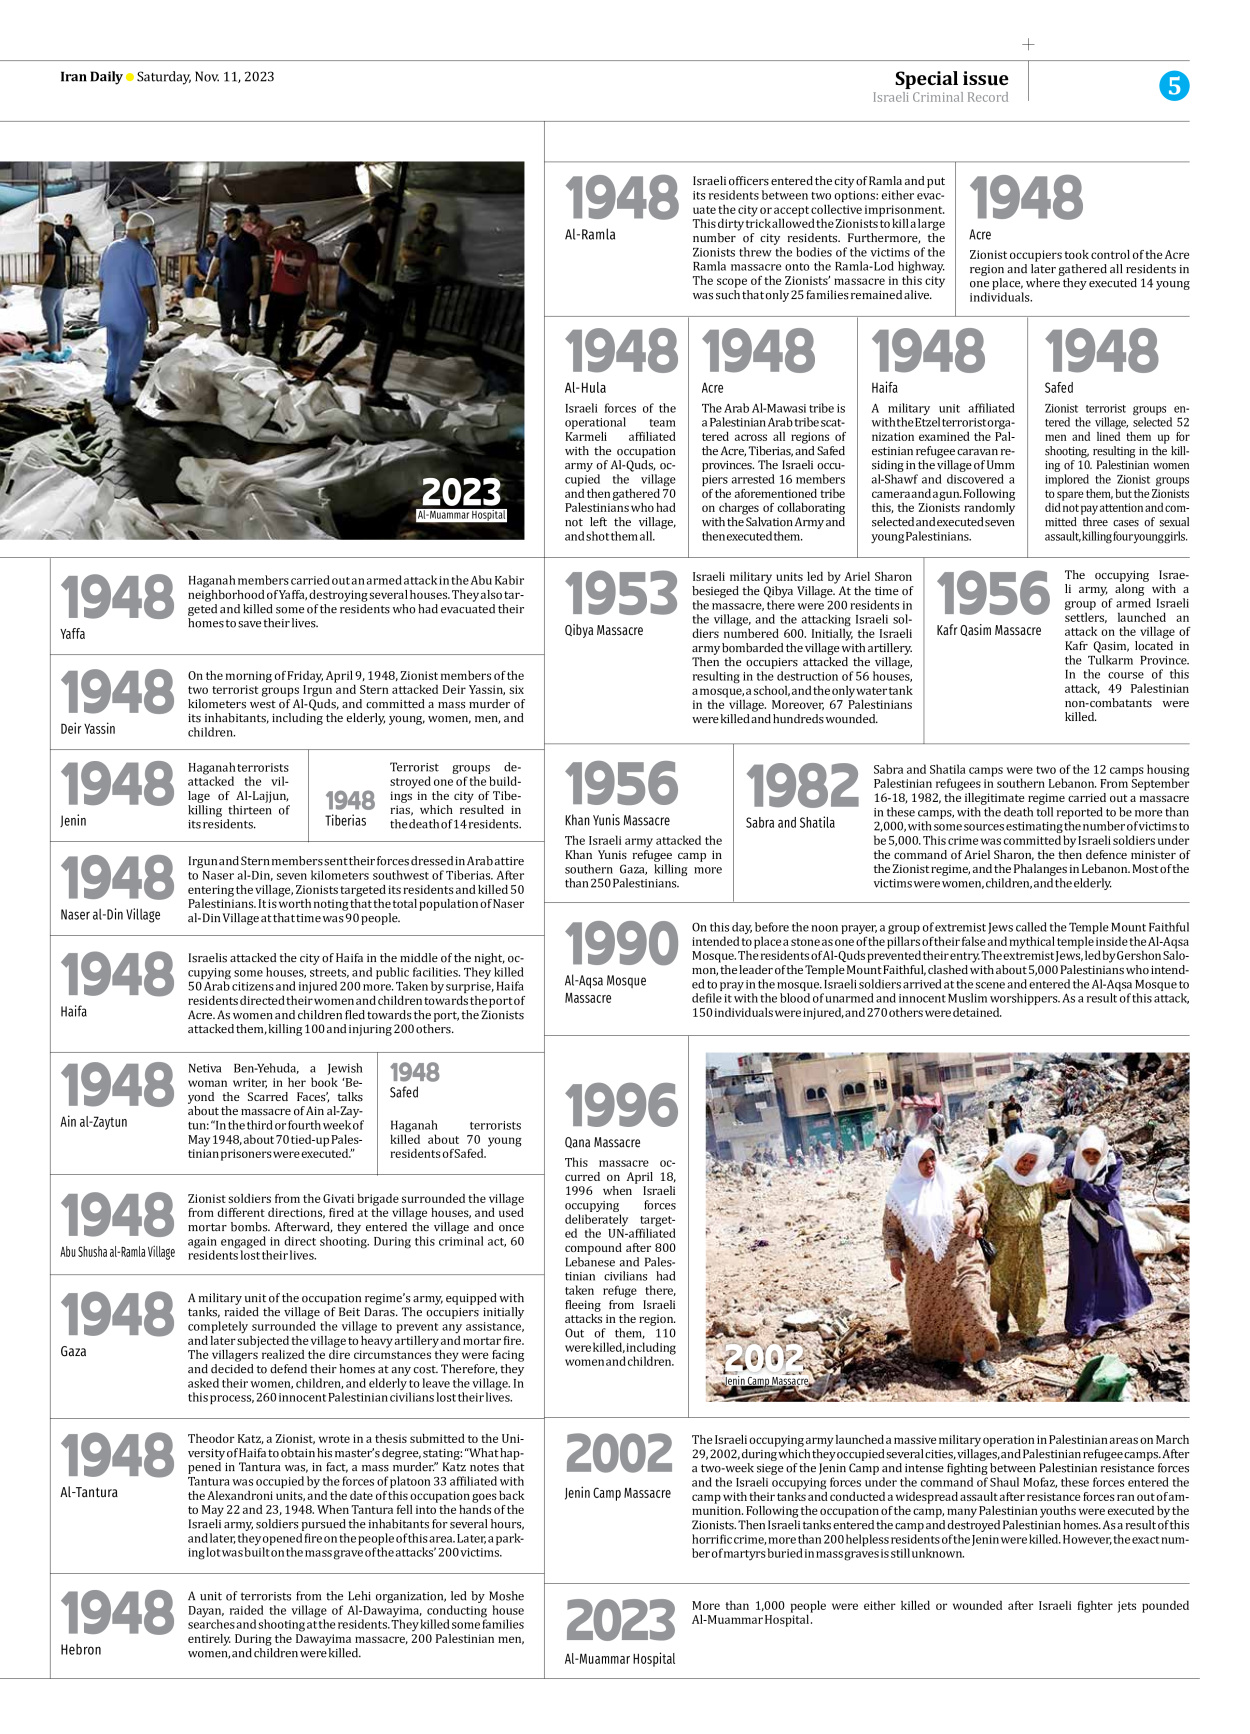 Iran Daily - Number Seven Thousand Four Hundred and Thirty One - 11 November 2023 - Page 5